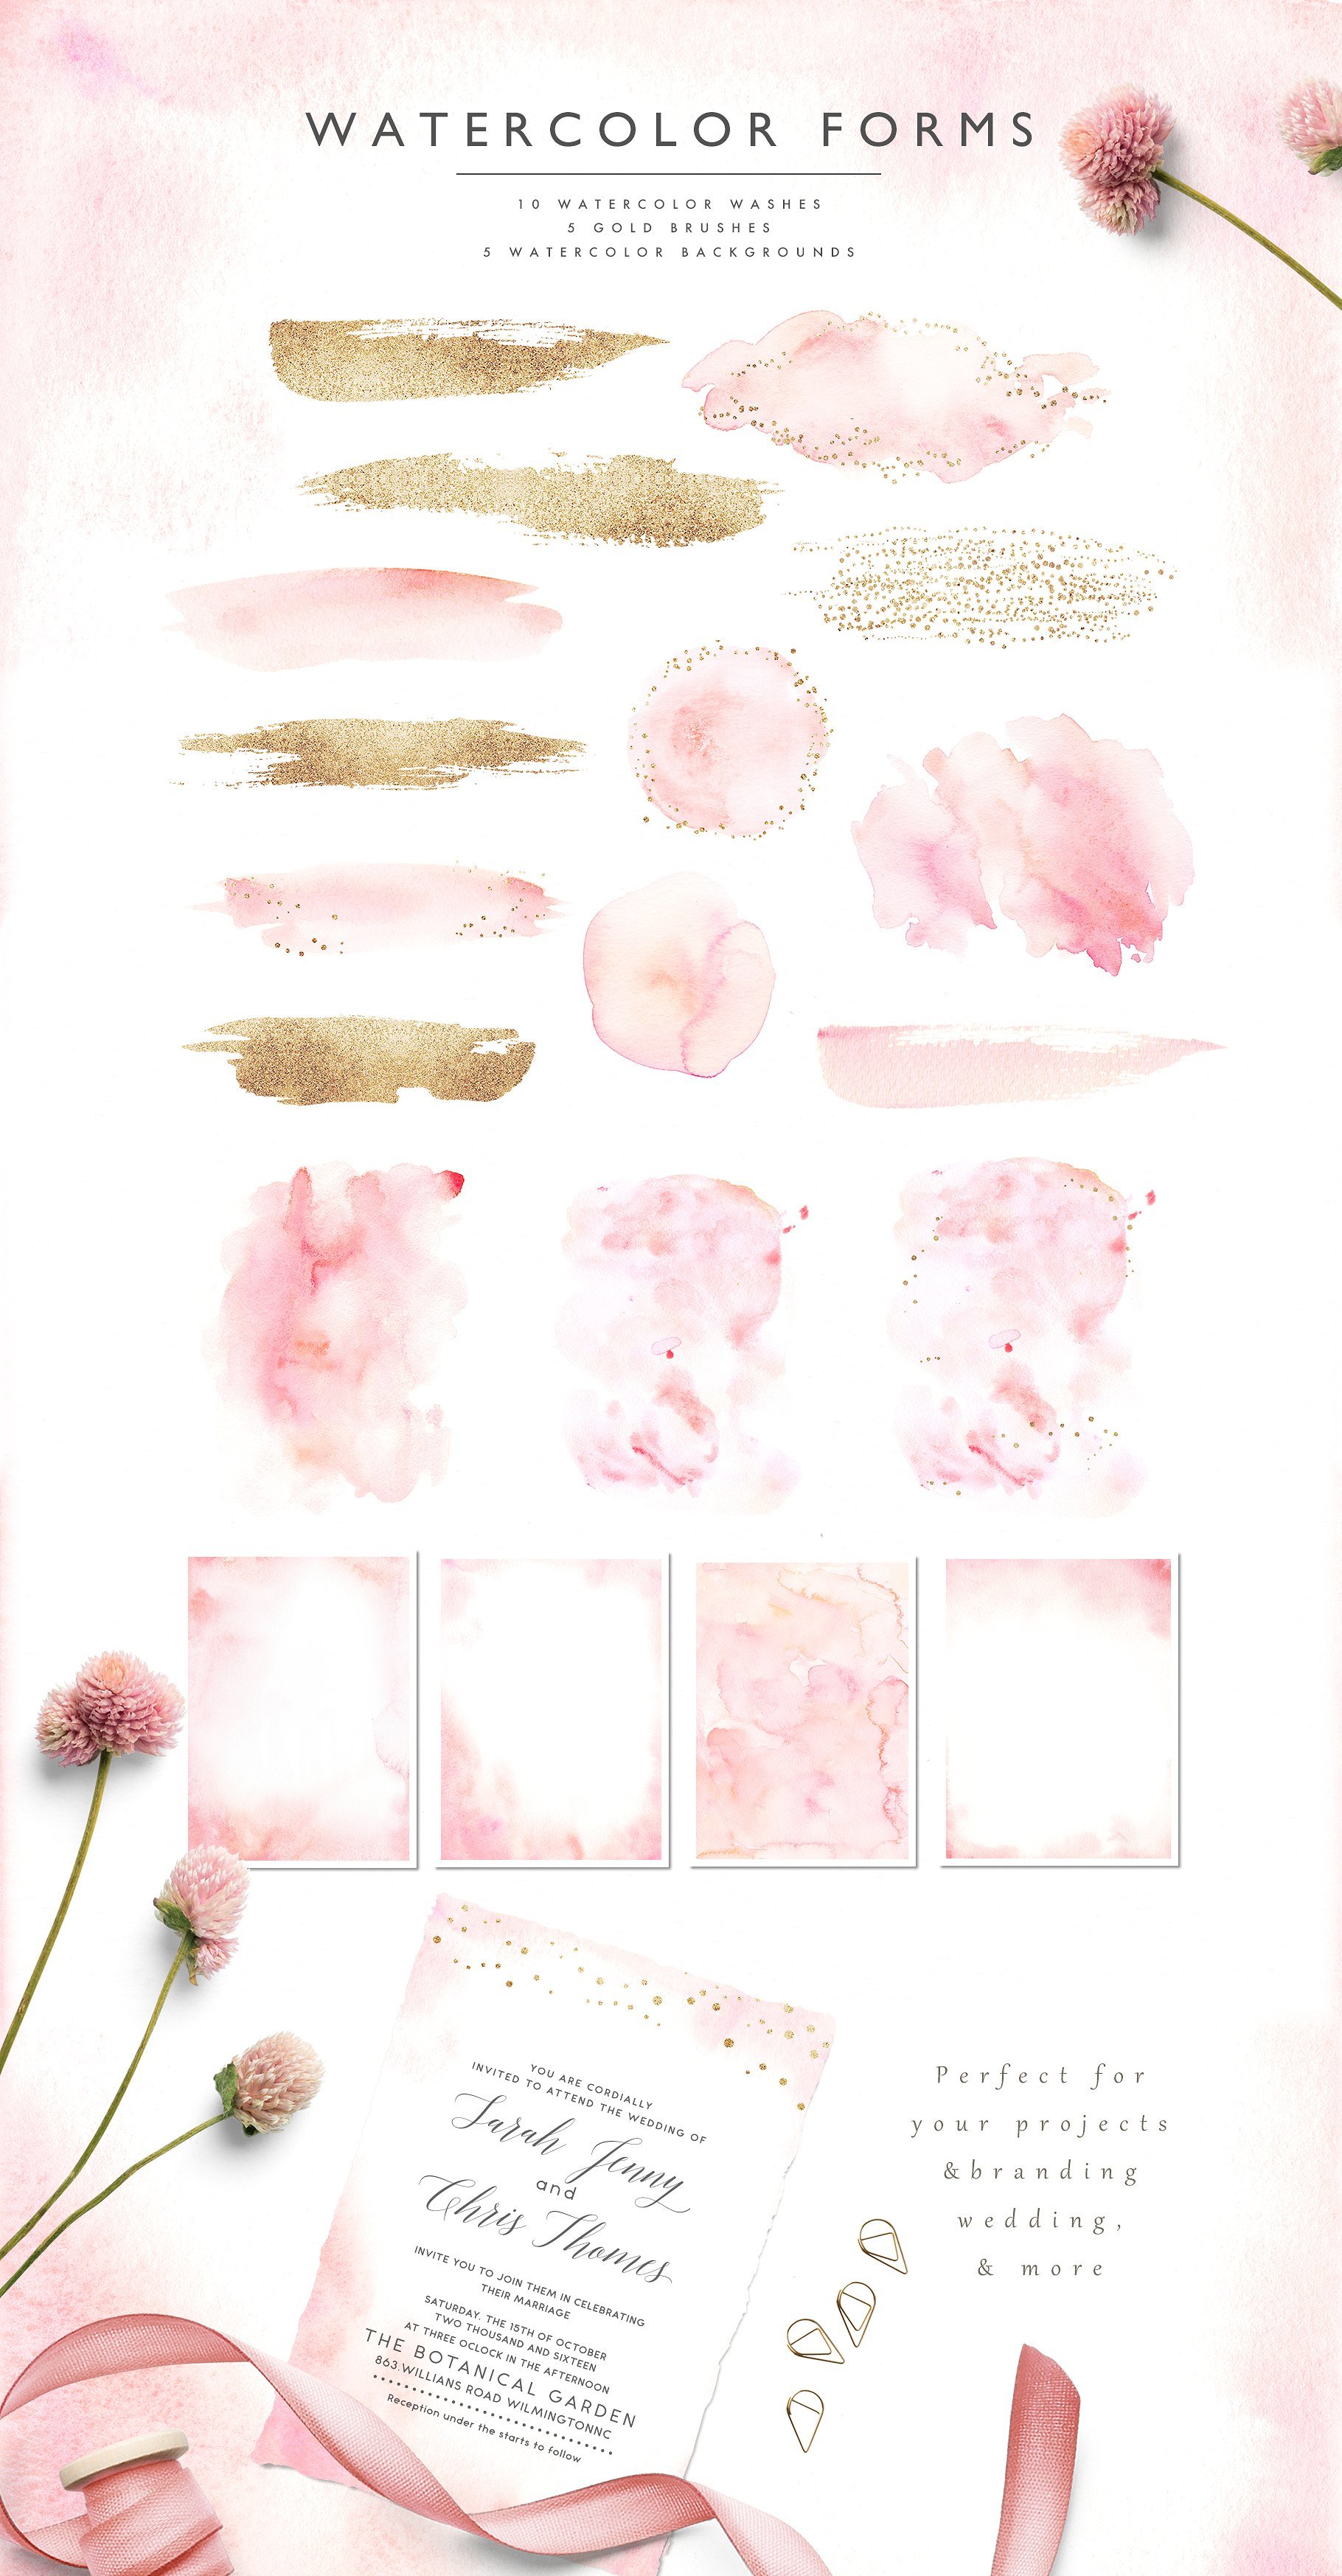 Ethereal Blush - Florals Graphic Set